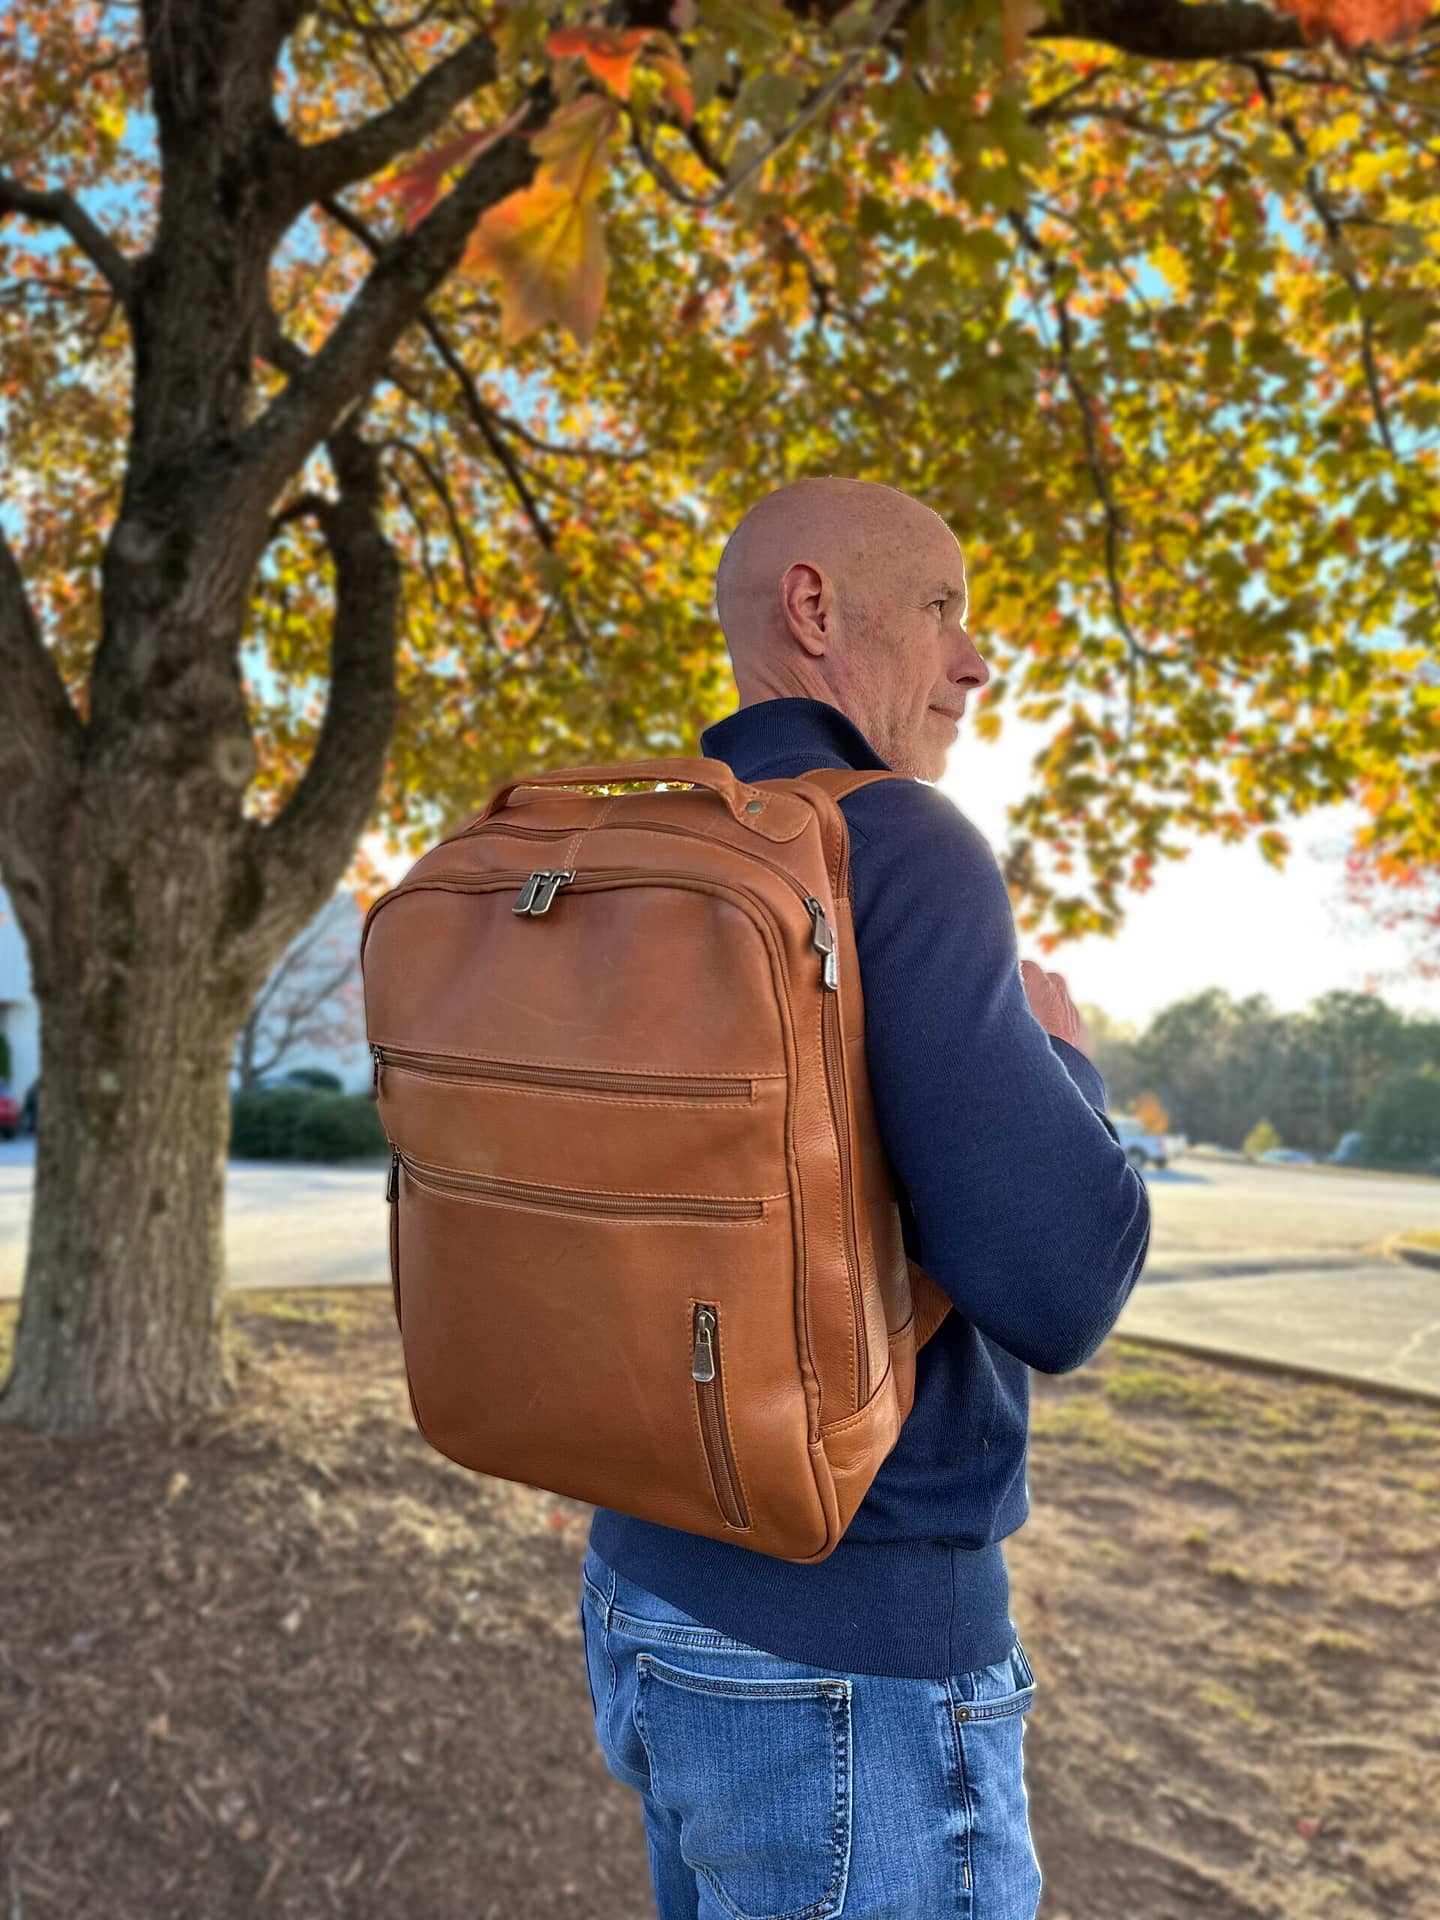 SLC-703 Lightweight backpack perfect for travel